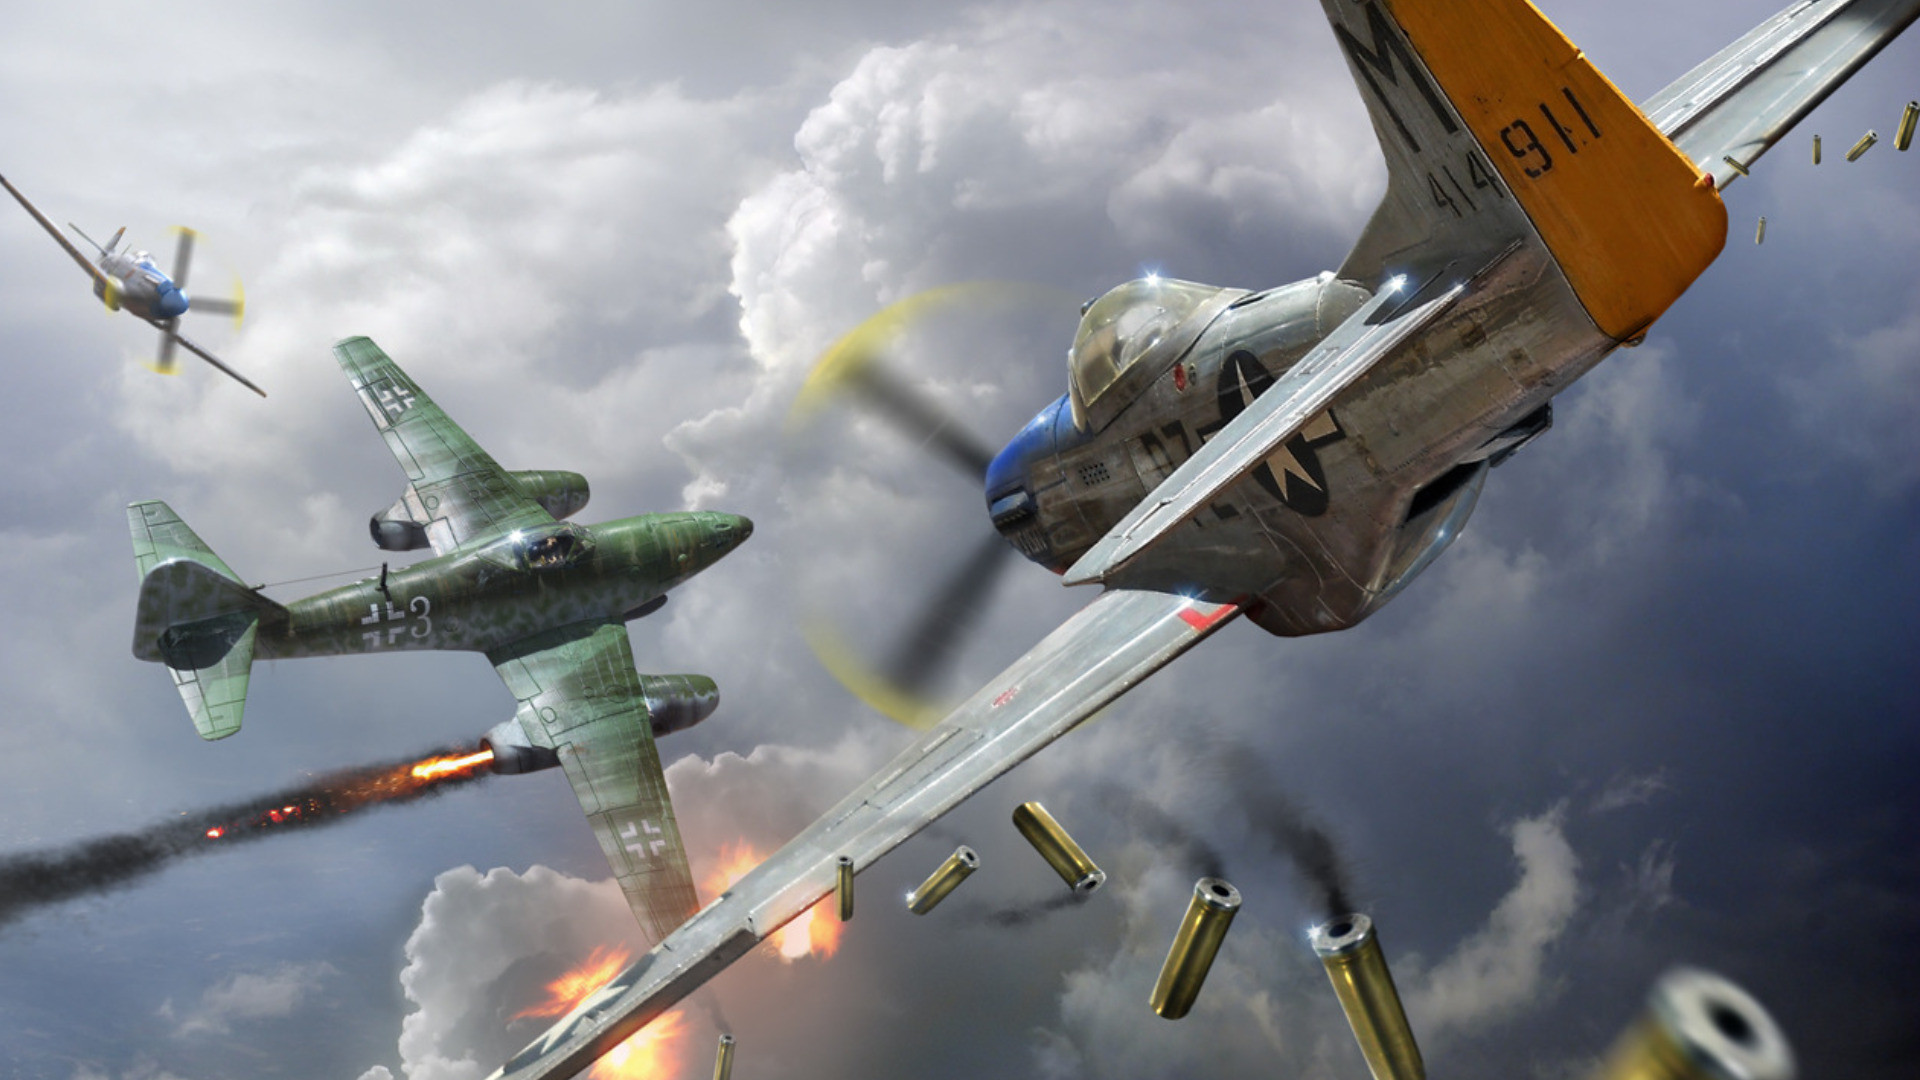 1920x1080 under the plane wallpapers category of hd wallpapers ww2 planes 